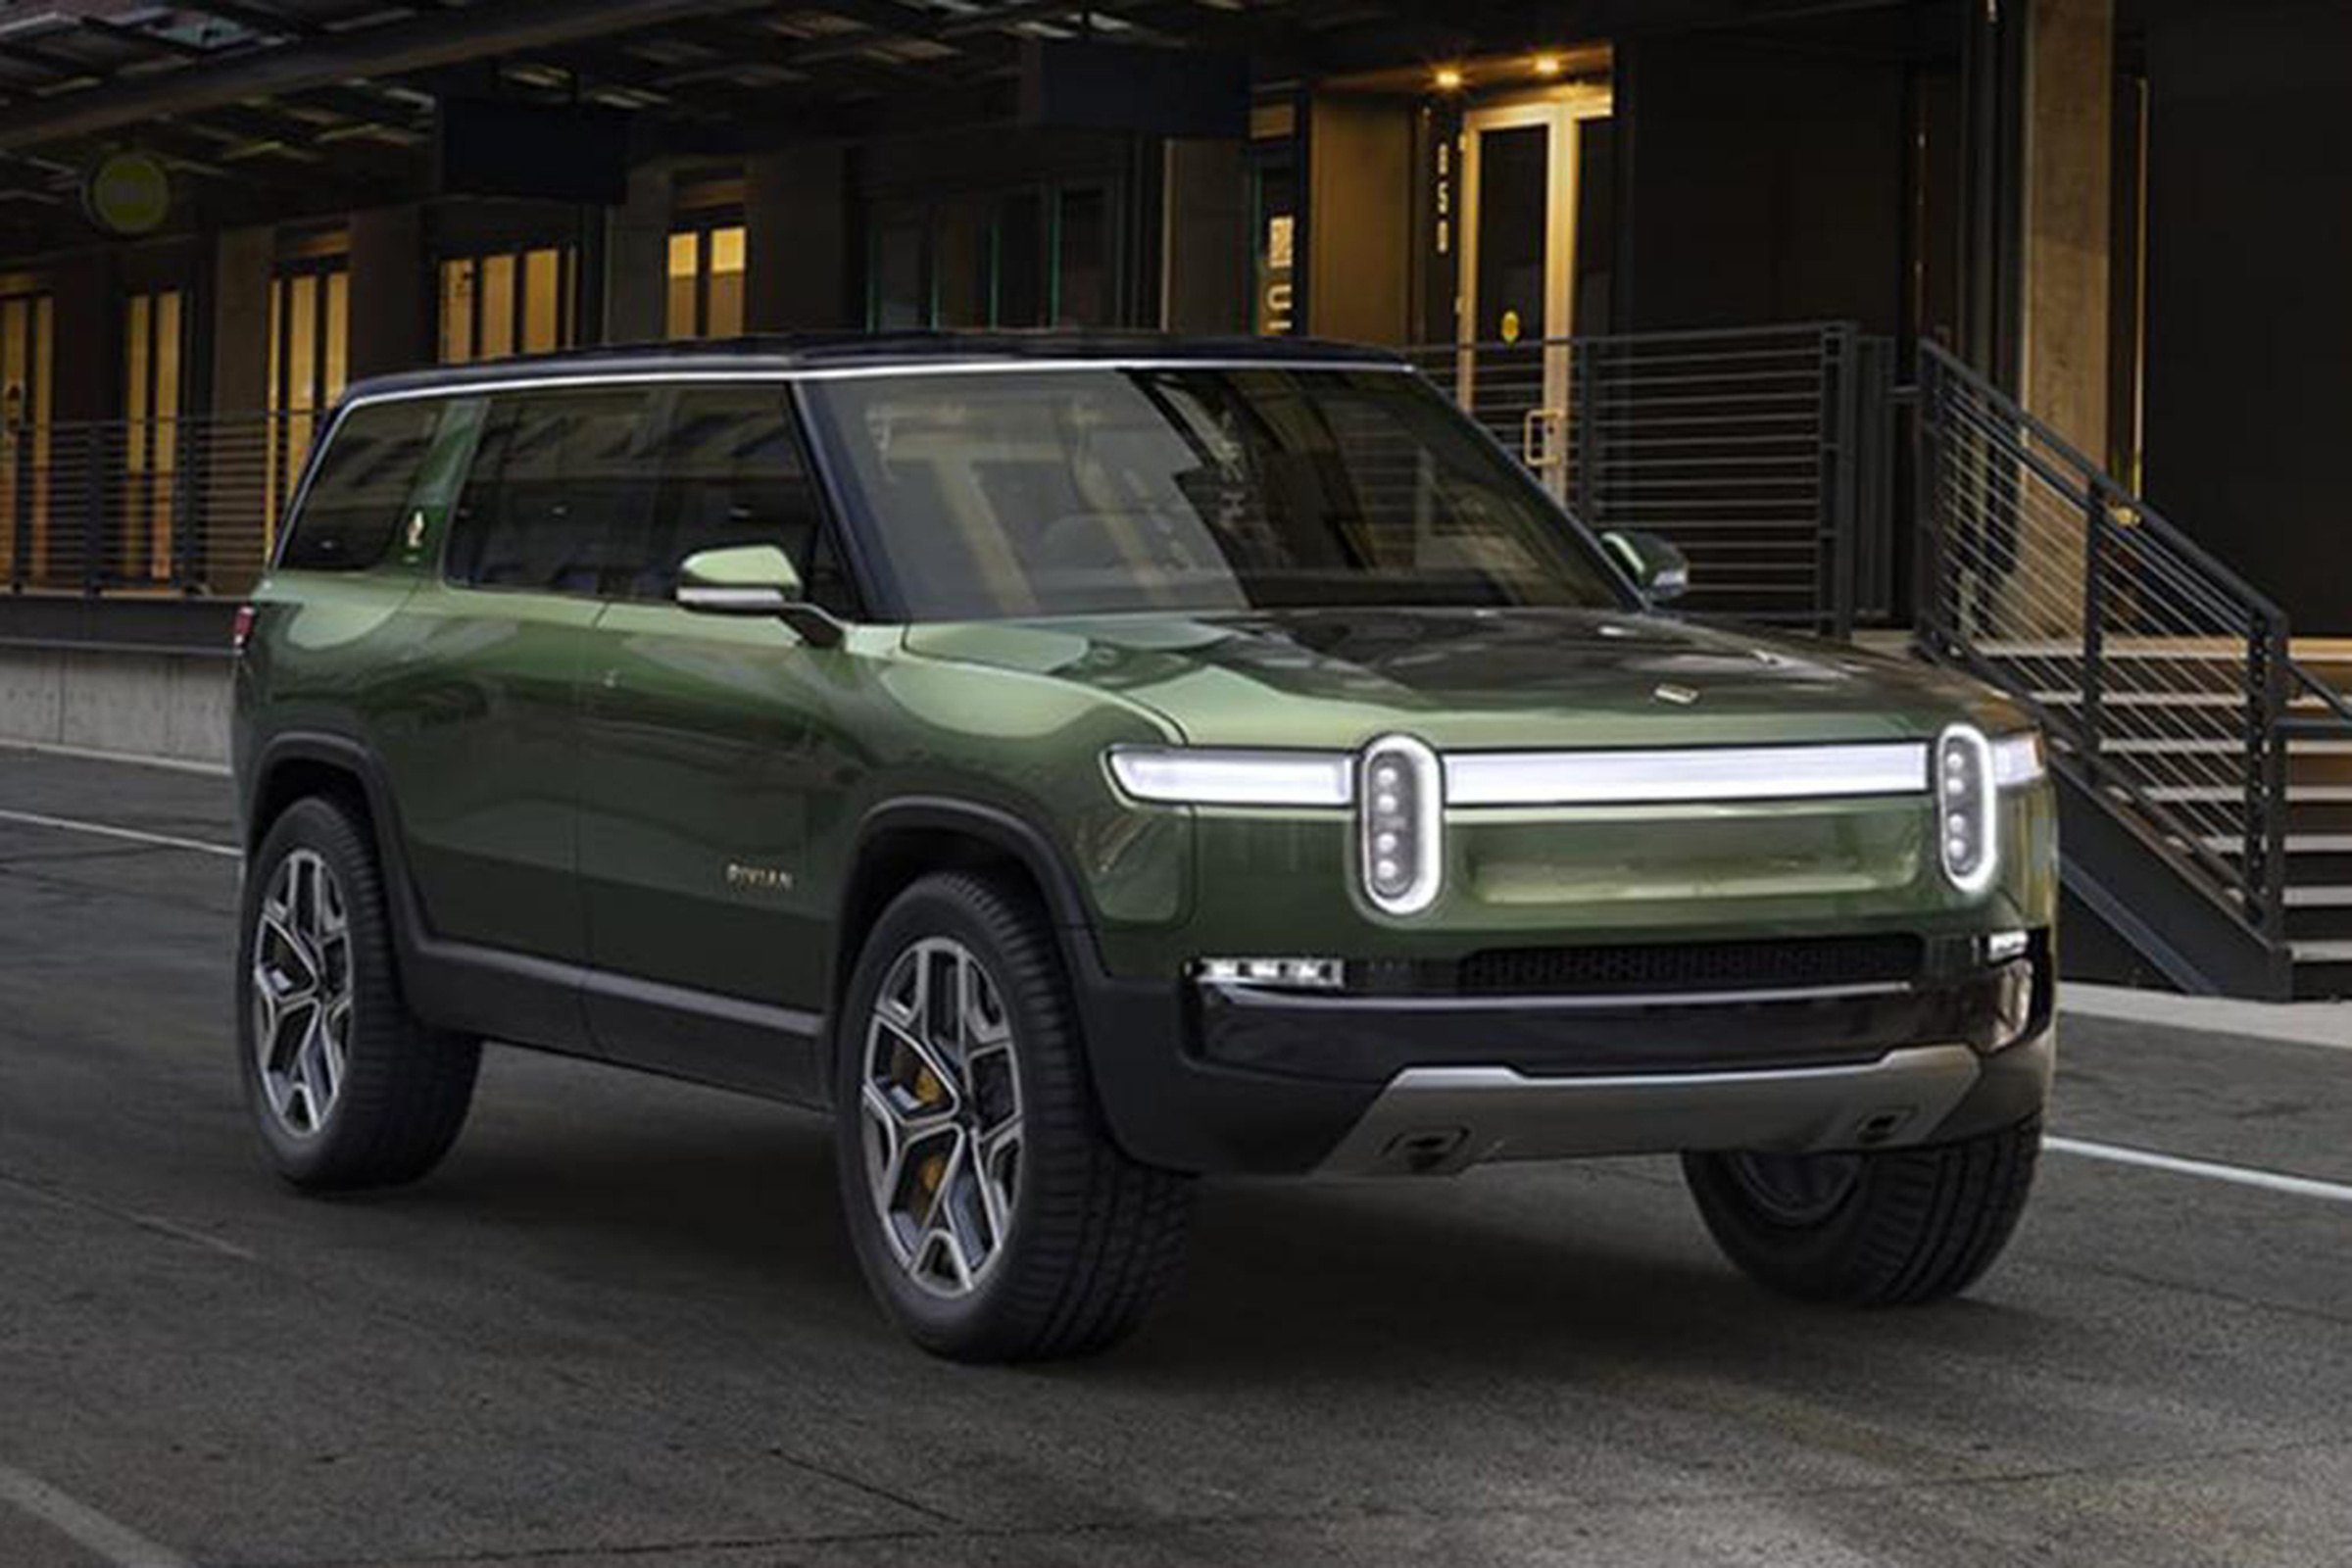 Rivian R1s Electric Suv Launched With Seven Seats And 750bhp | Images ...